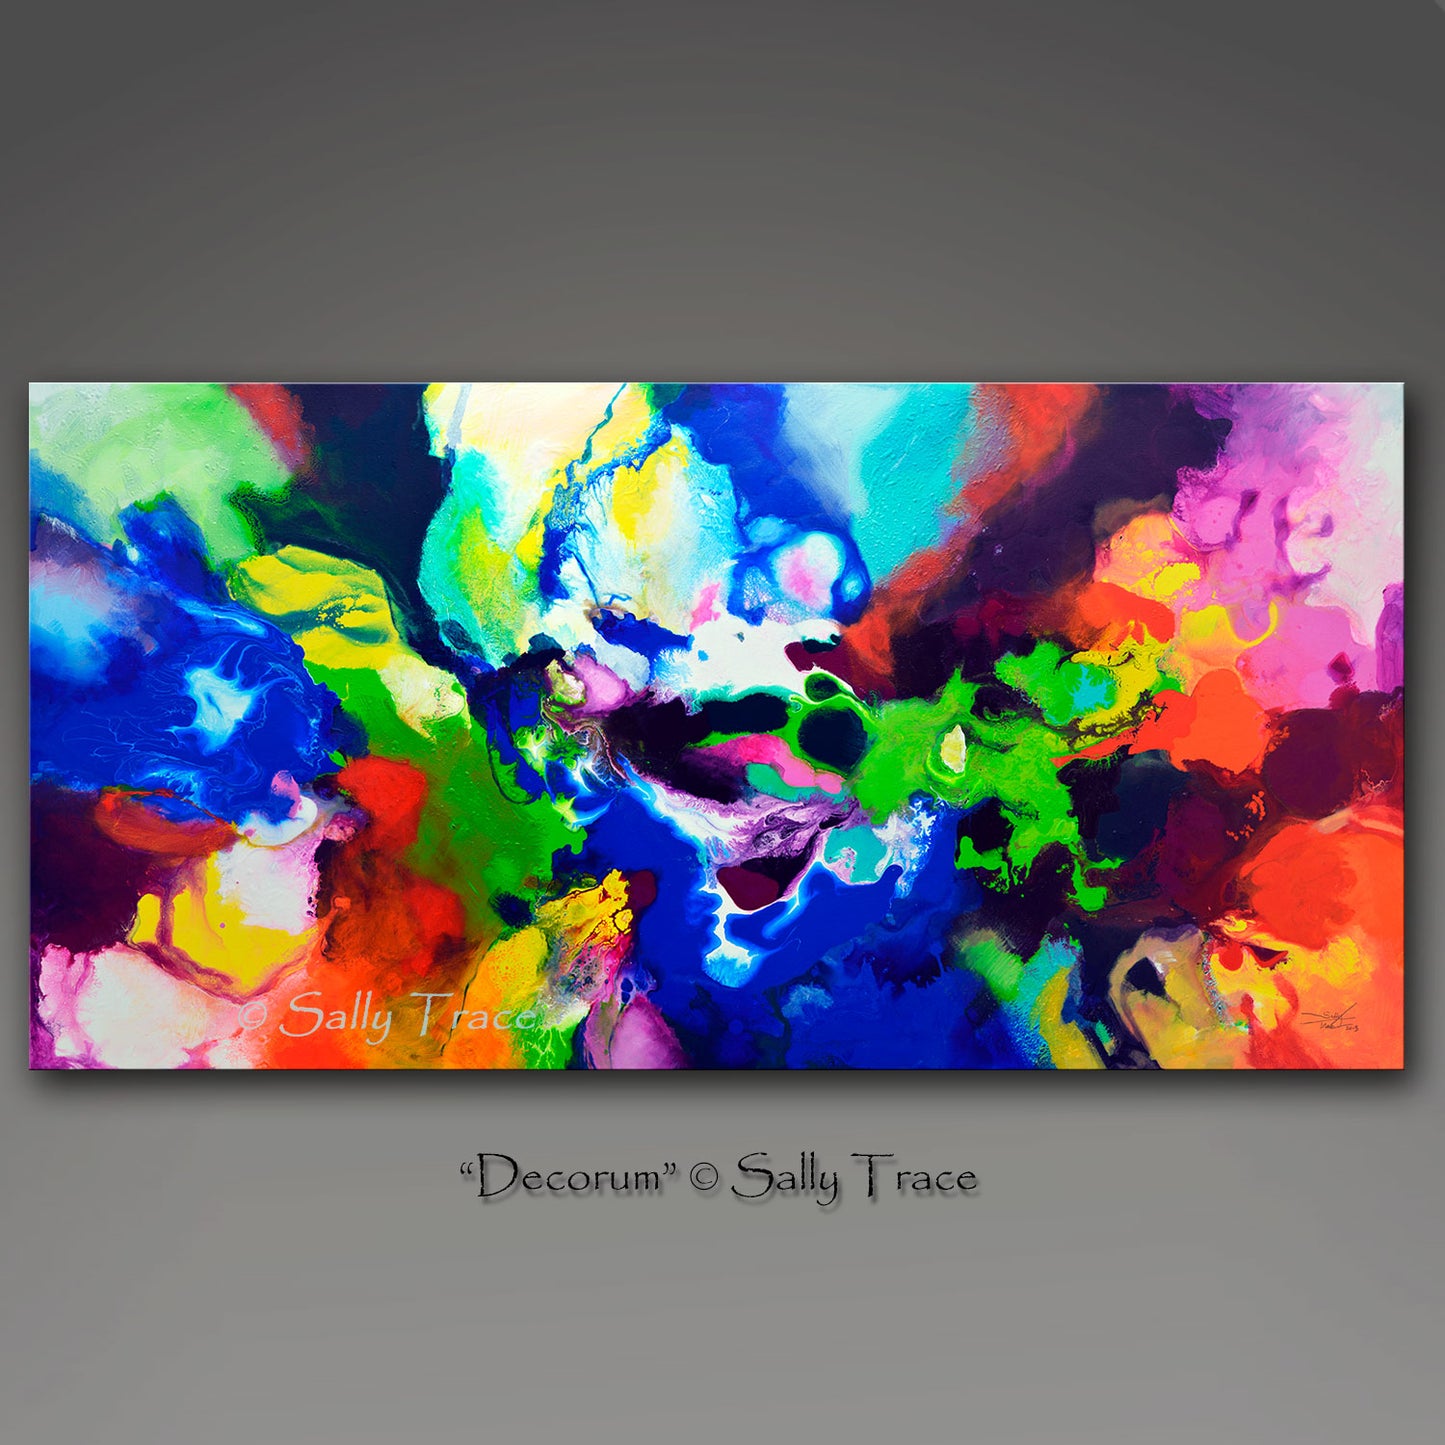 Decorum, canvas prints of the fluid abstract painting by Sally Trace, detail